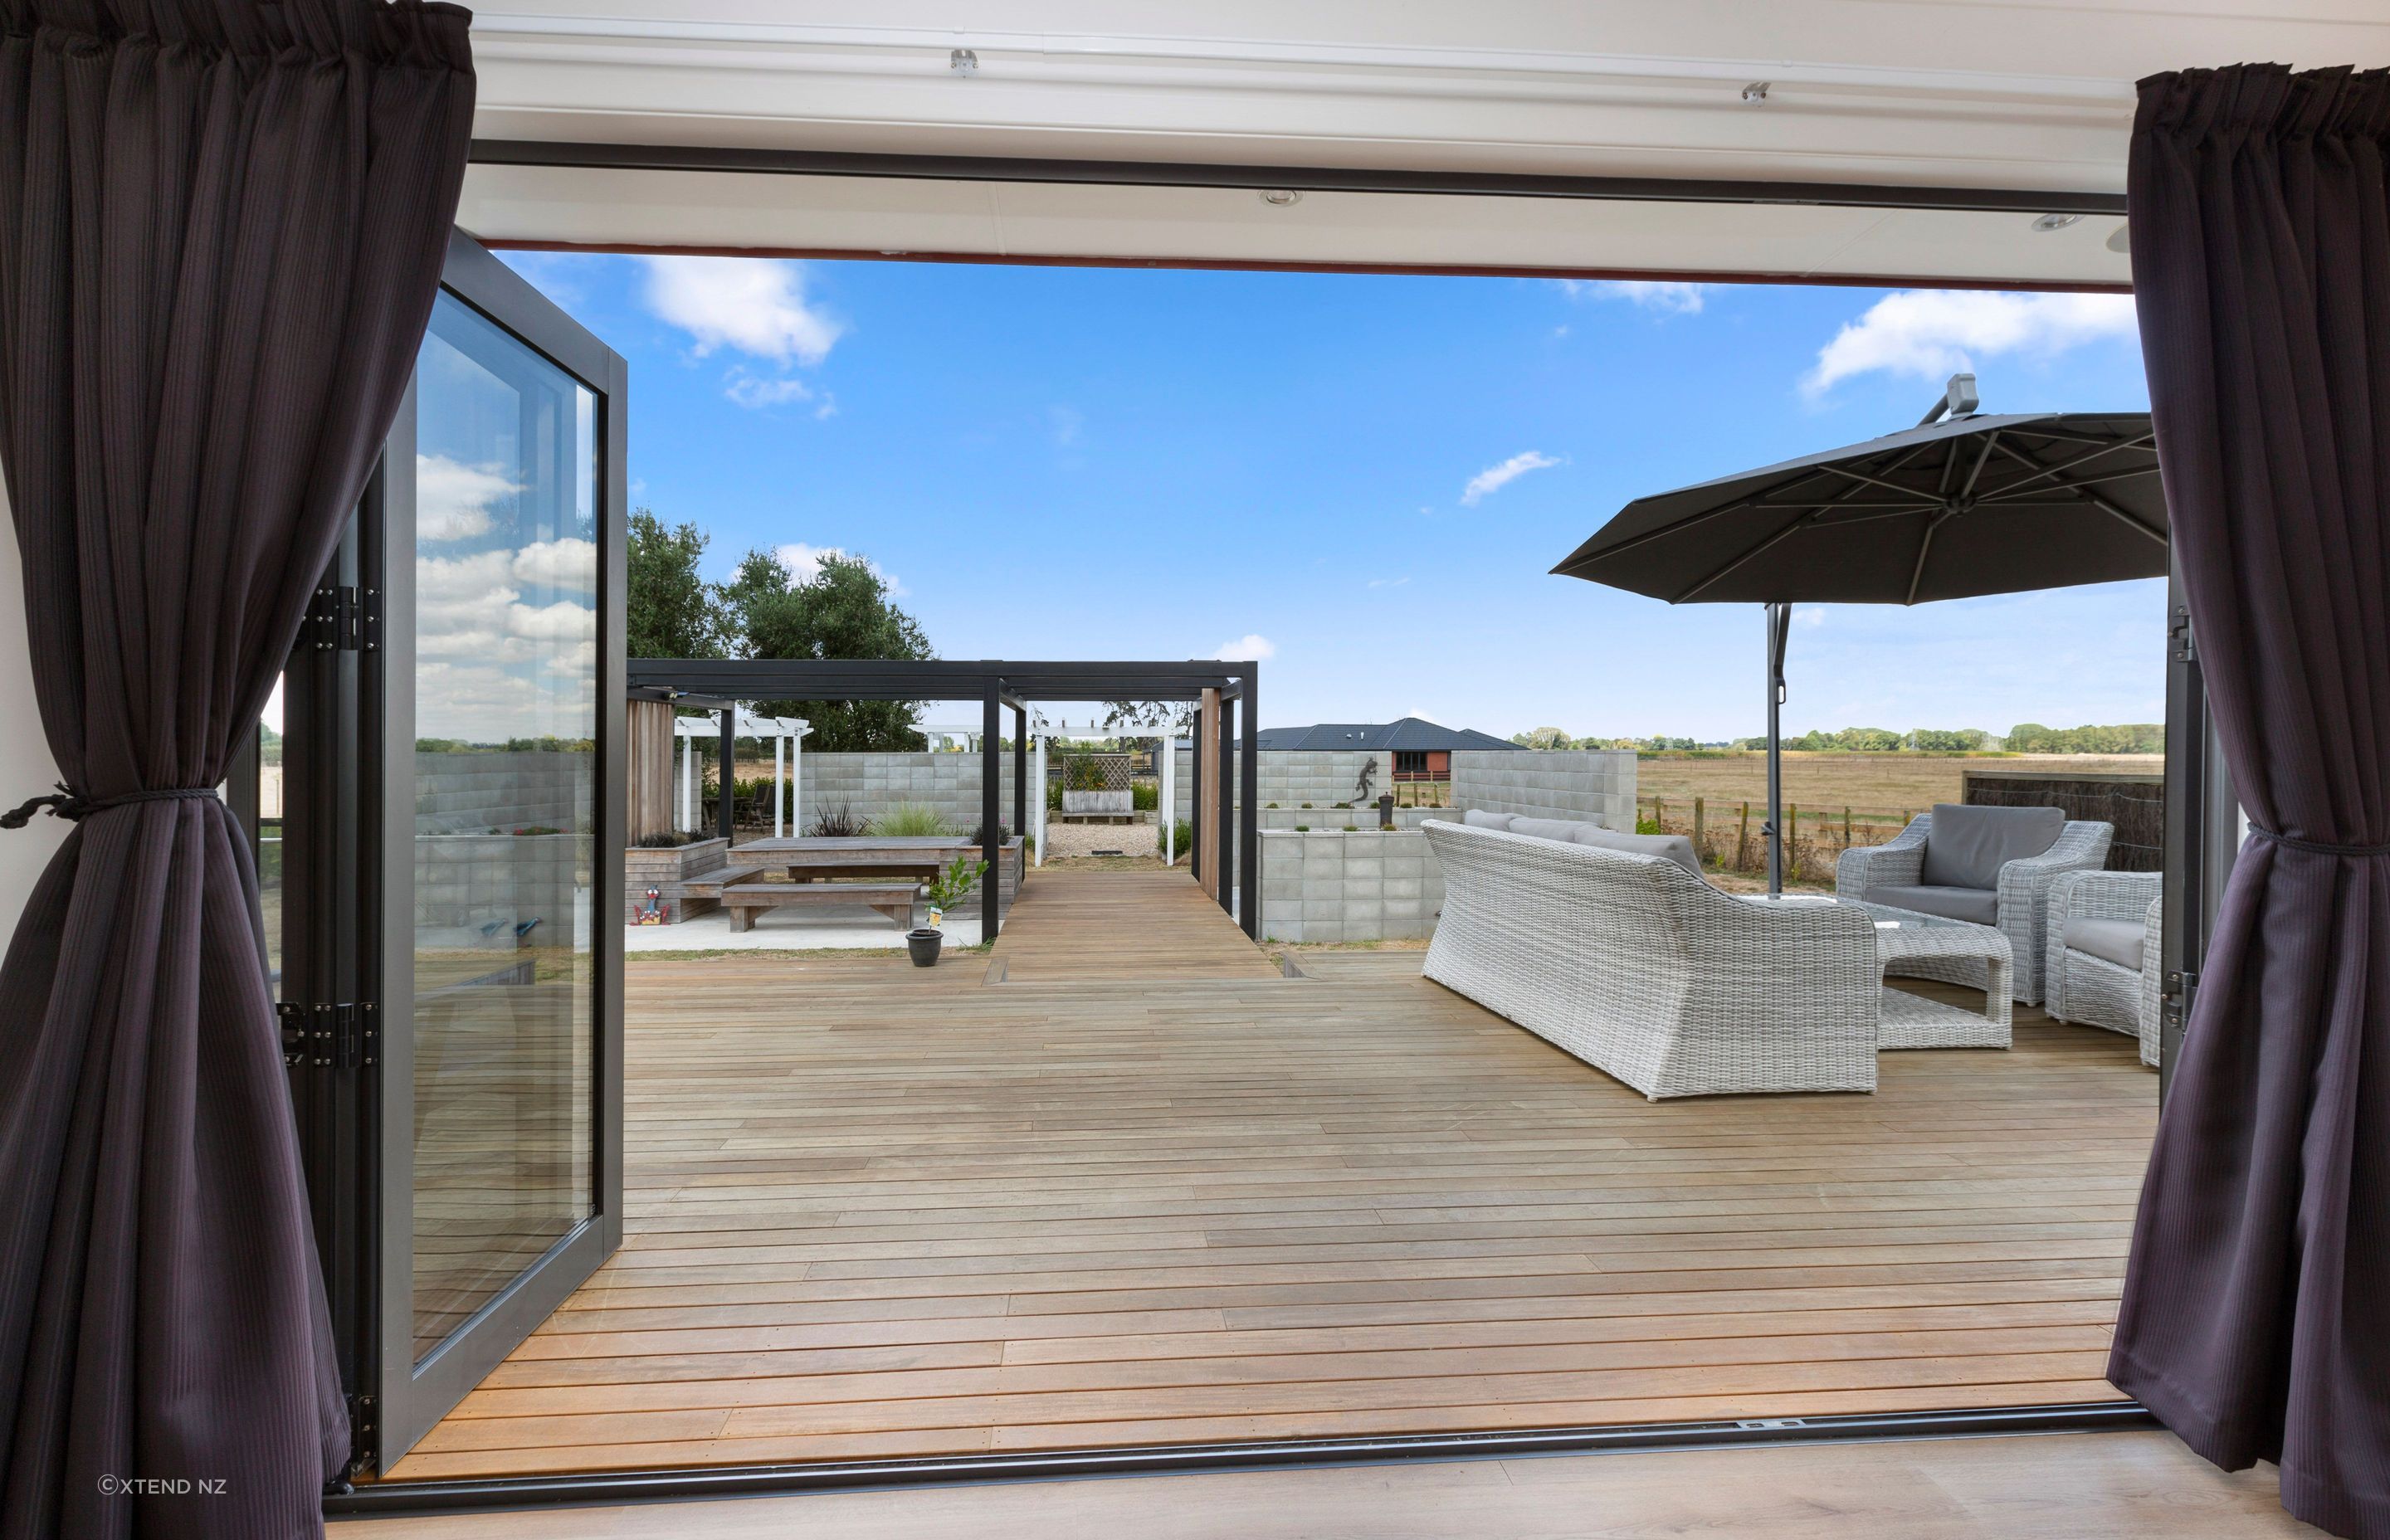 Bifold doors were installed, opening out onto a large Vitex deck for great indoor-outdoor flow.